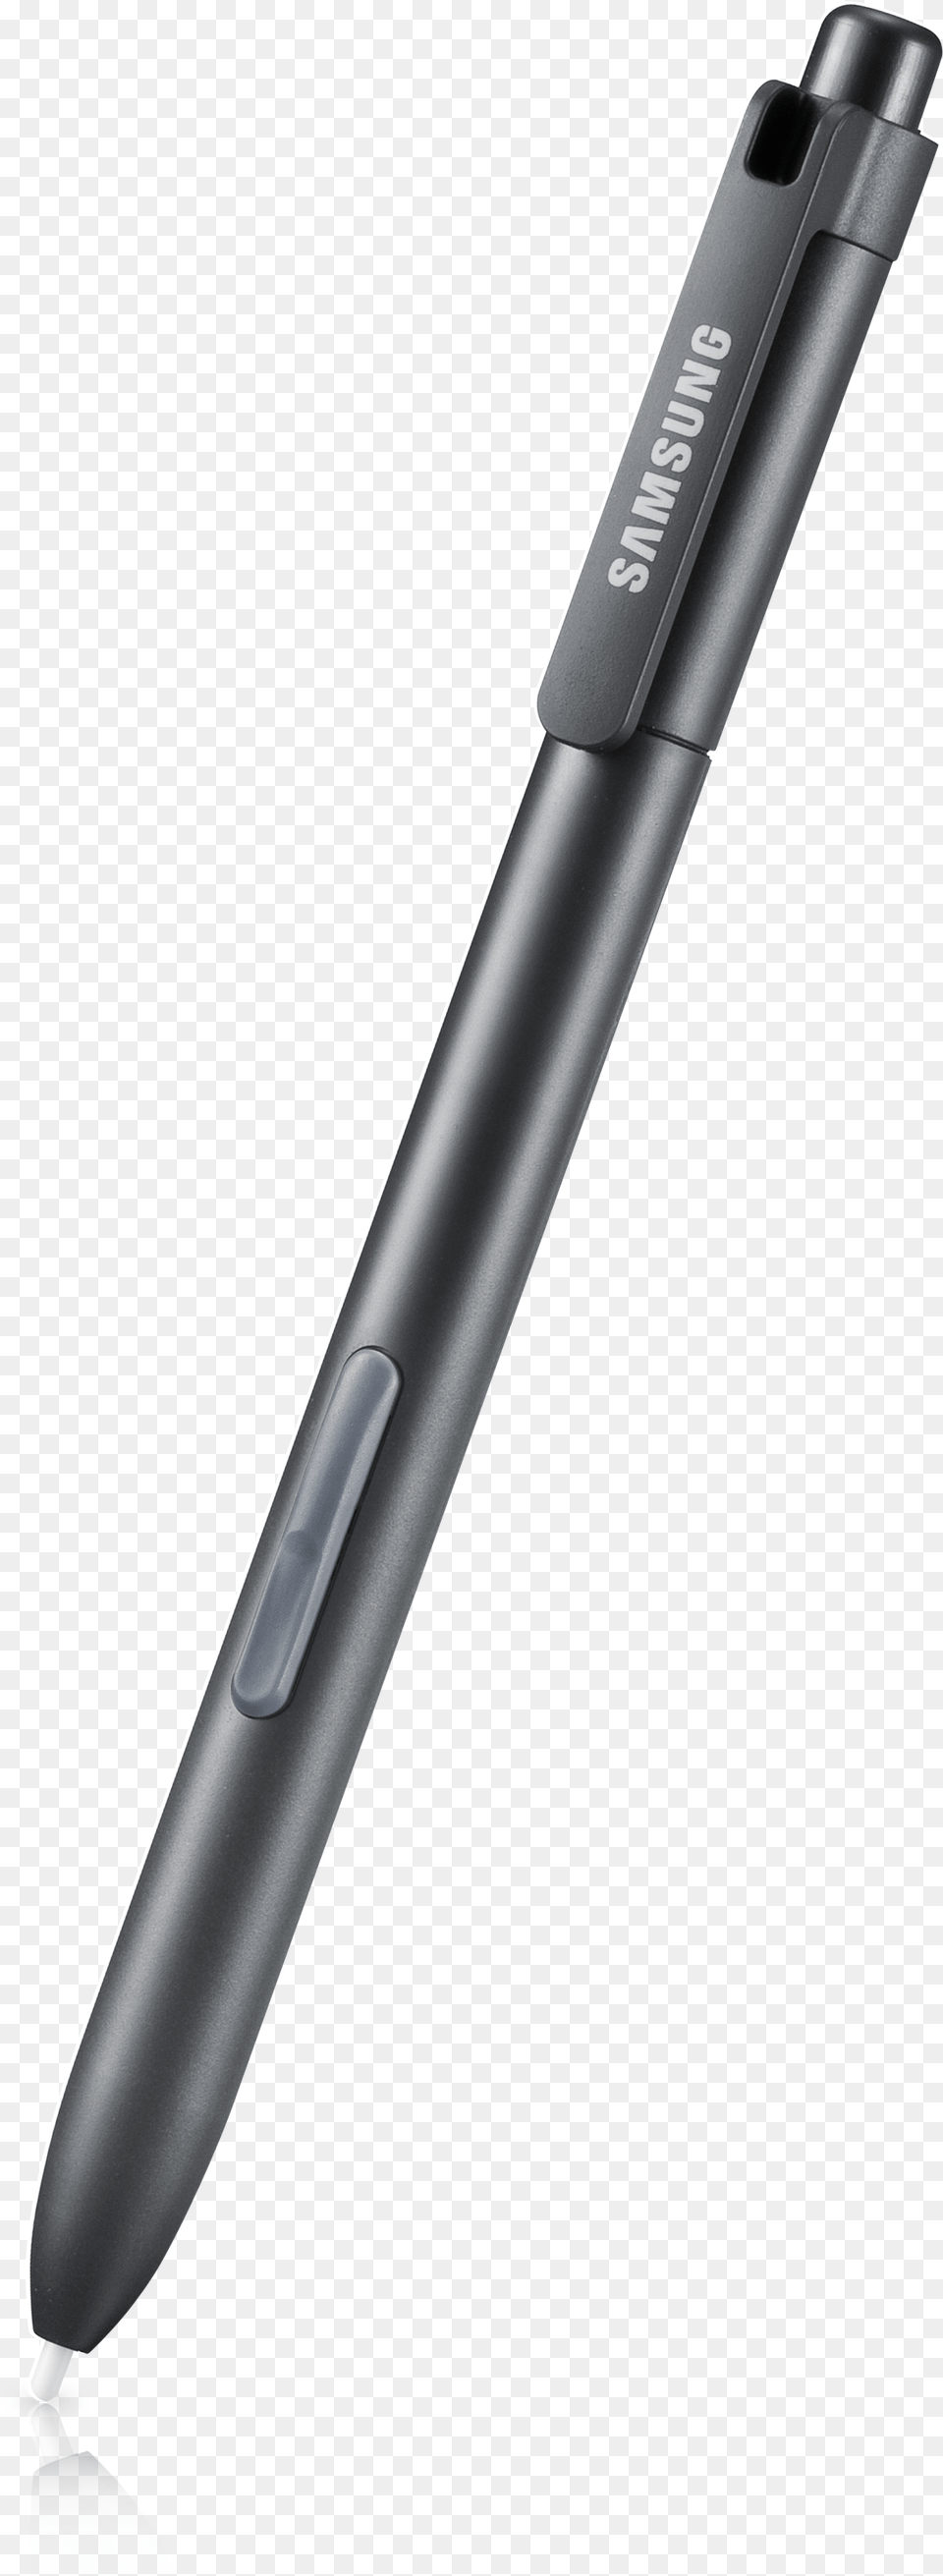 Galaxy Note 101 S Pen Samsung Support Hken Penna Moleskine, Blade, Dagger, Knife, Weapon Free Transparent Png